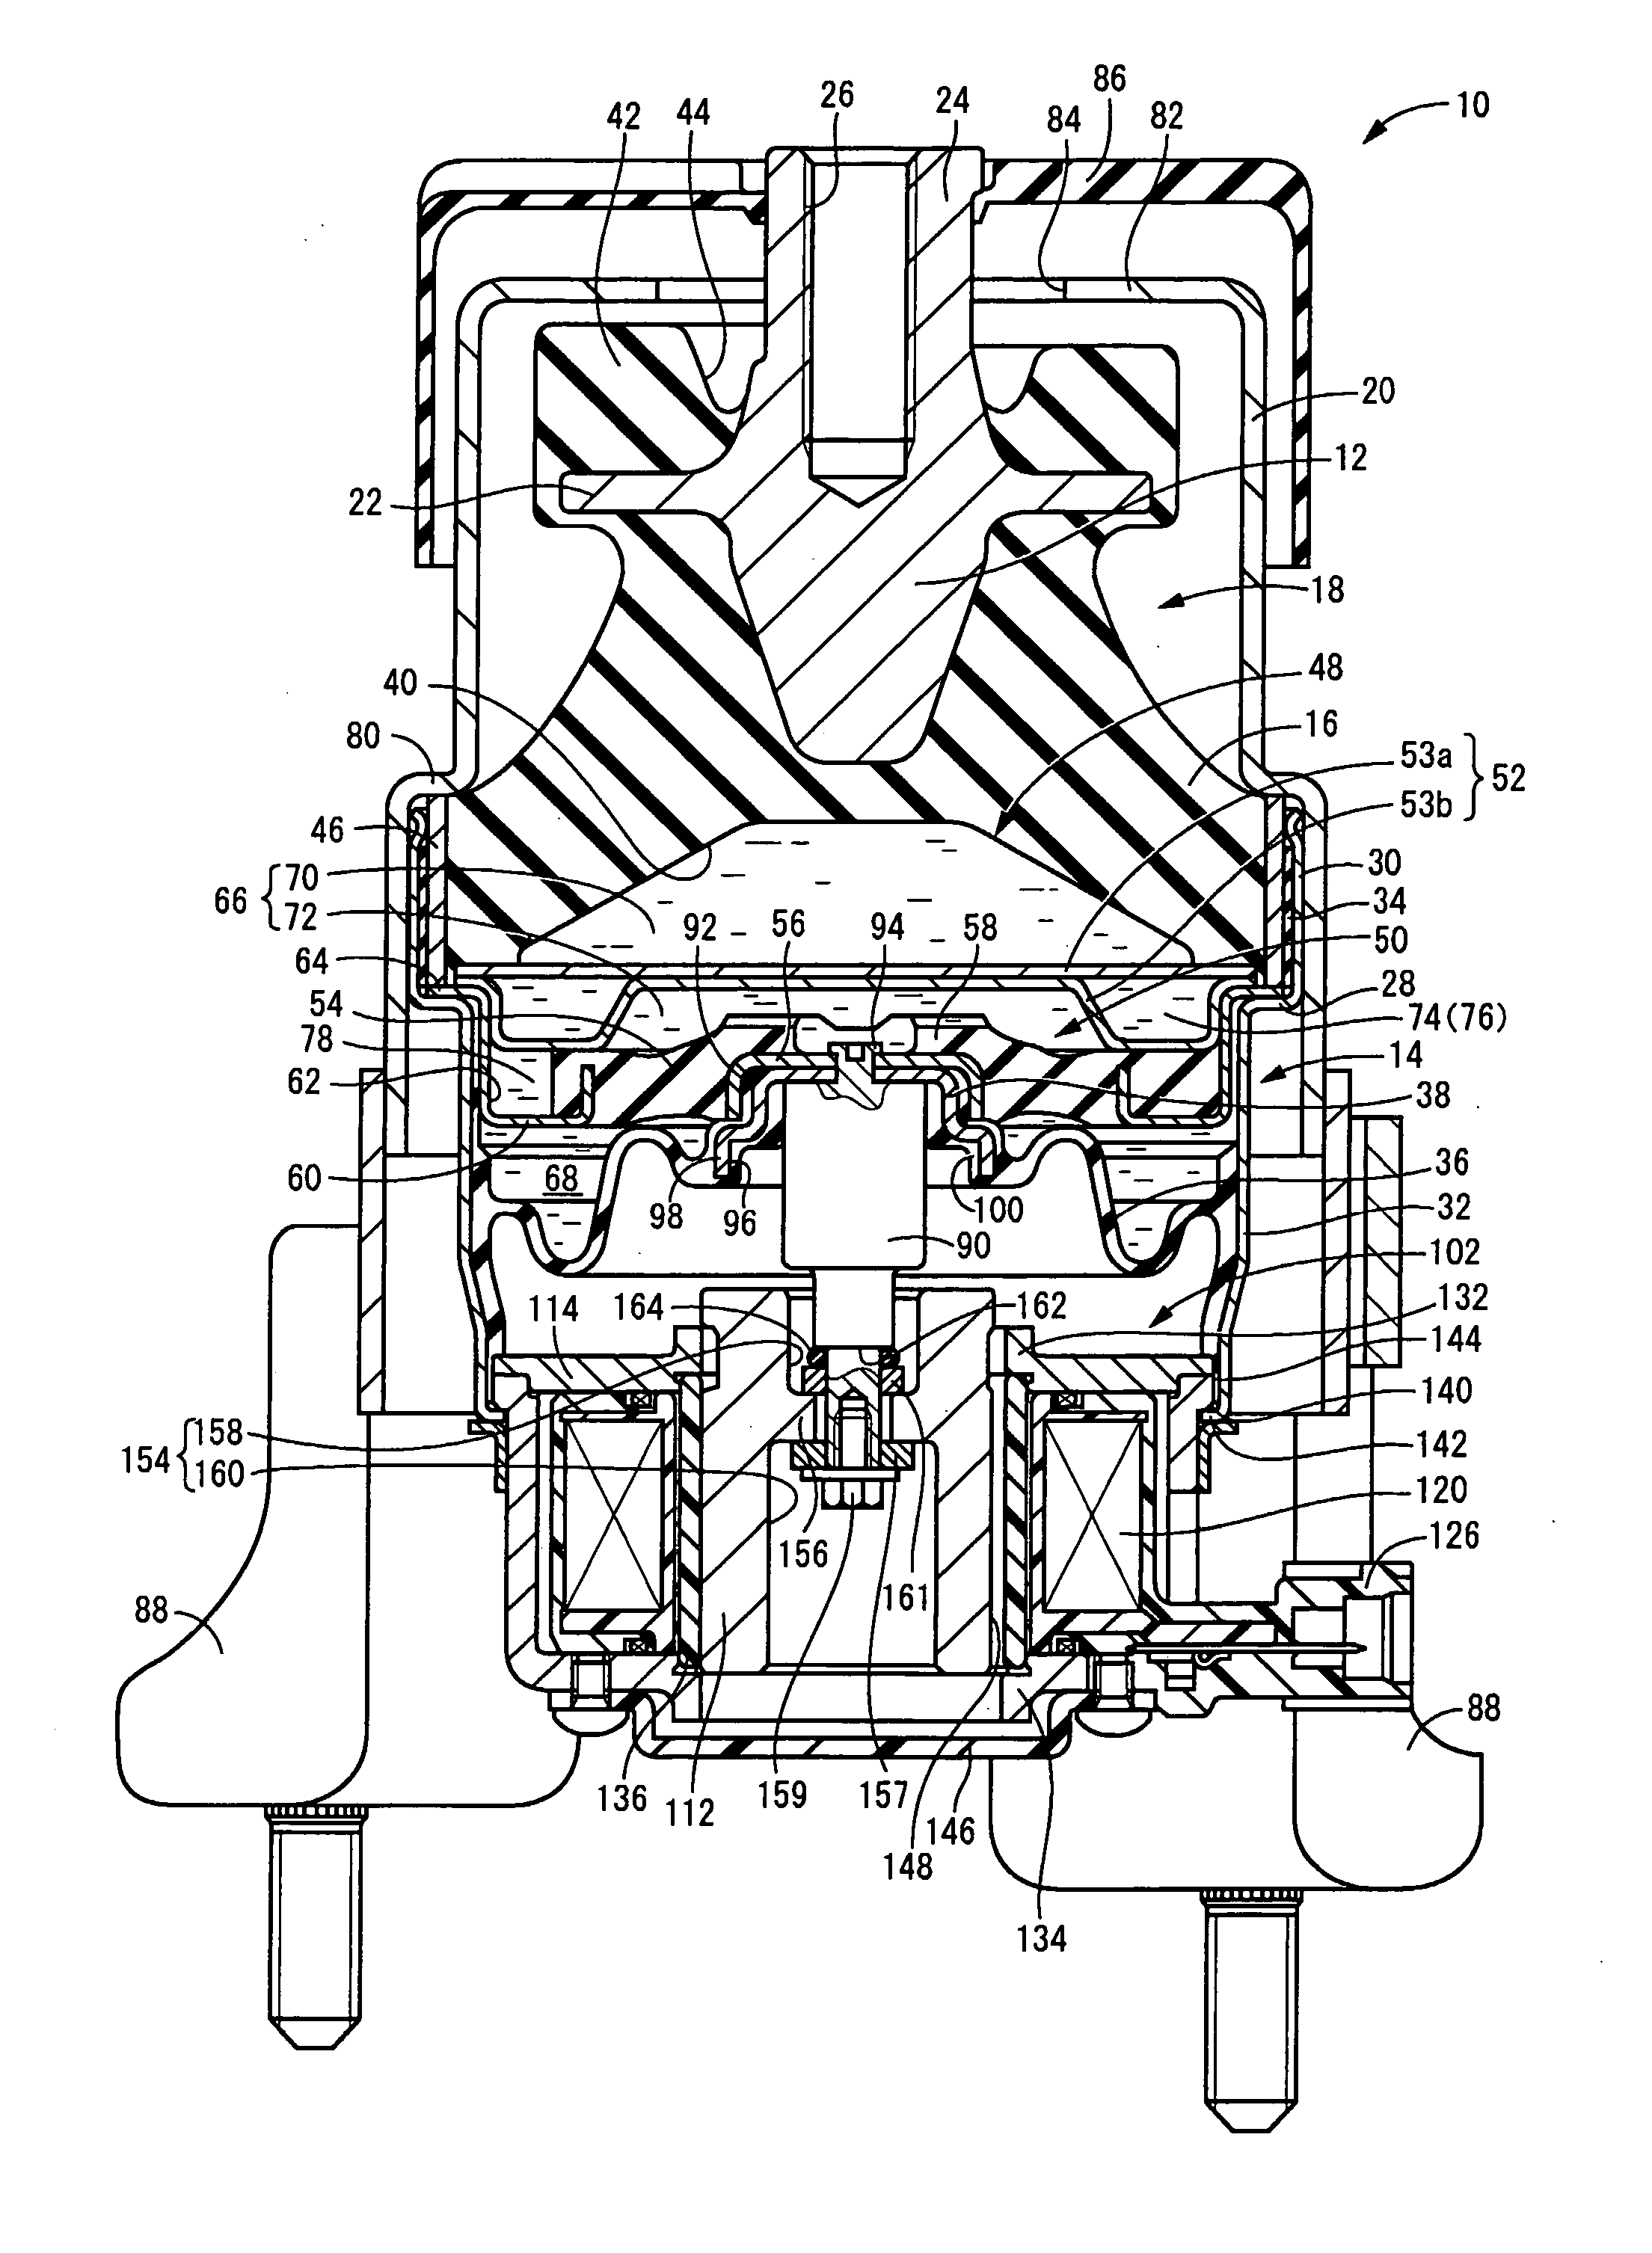 Active vibration damping device